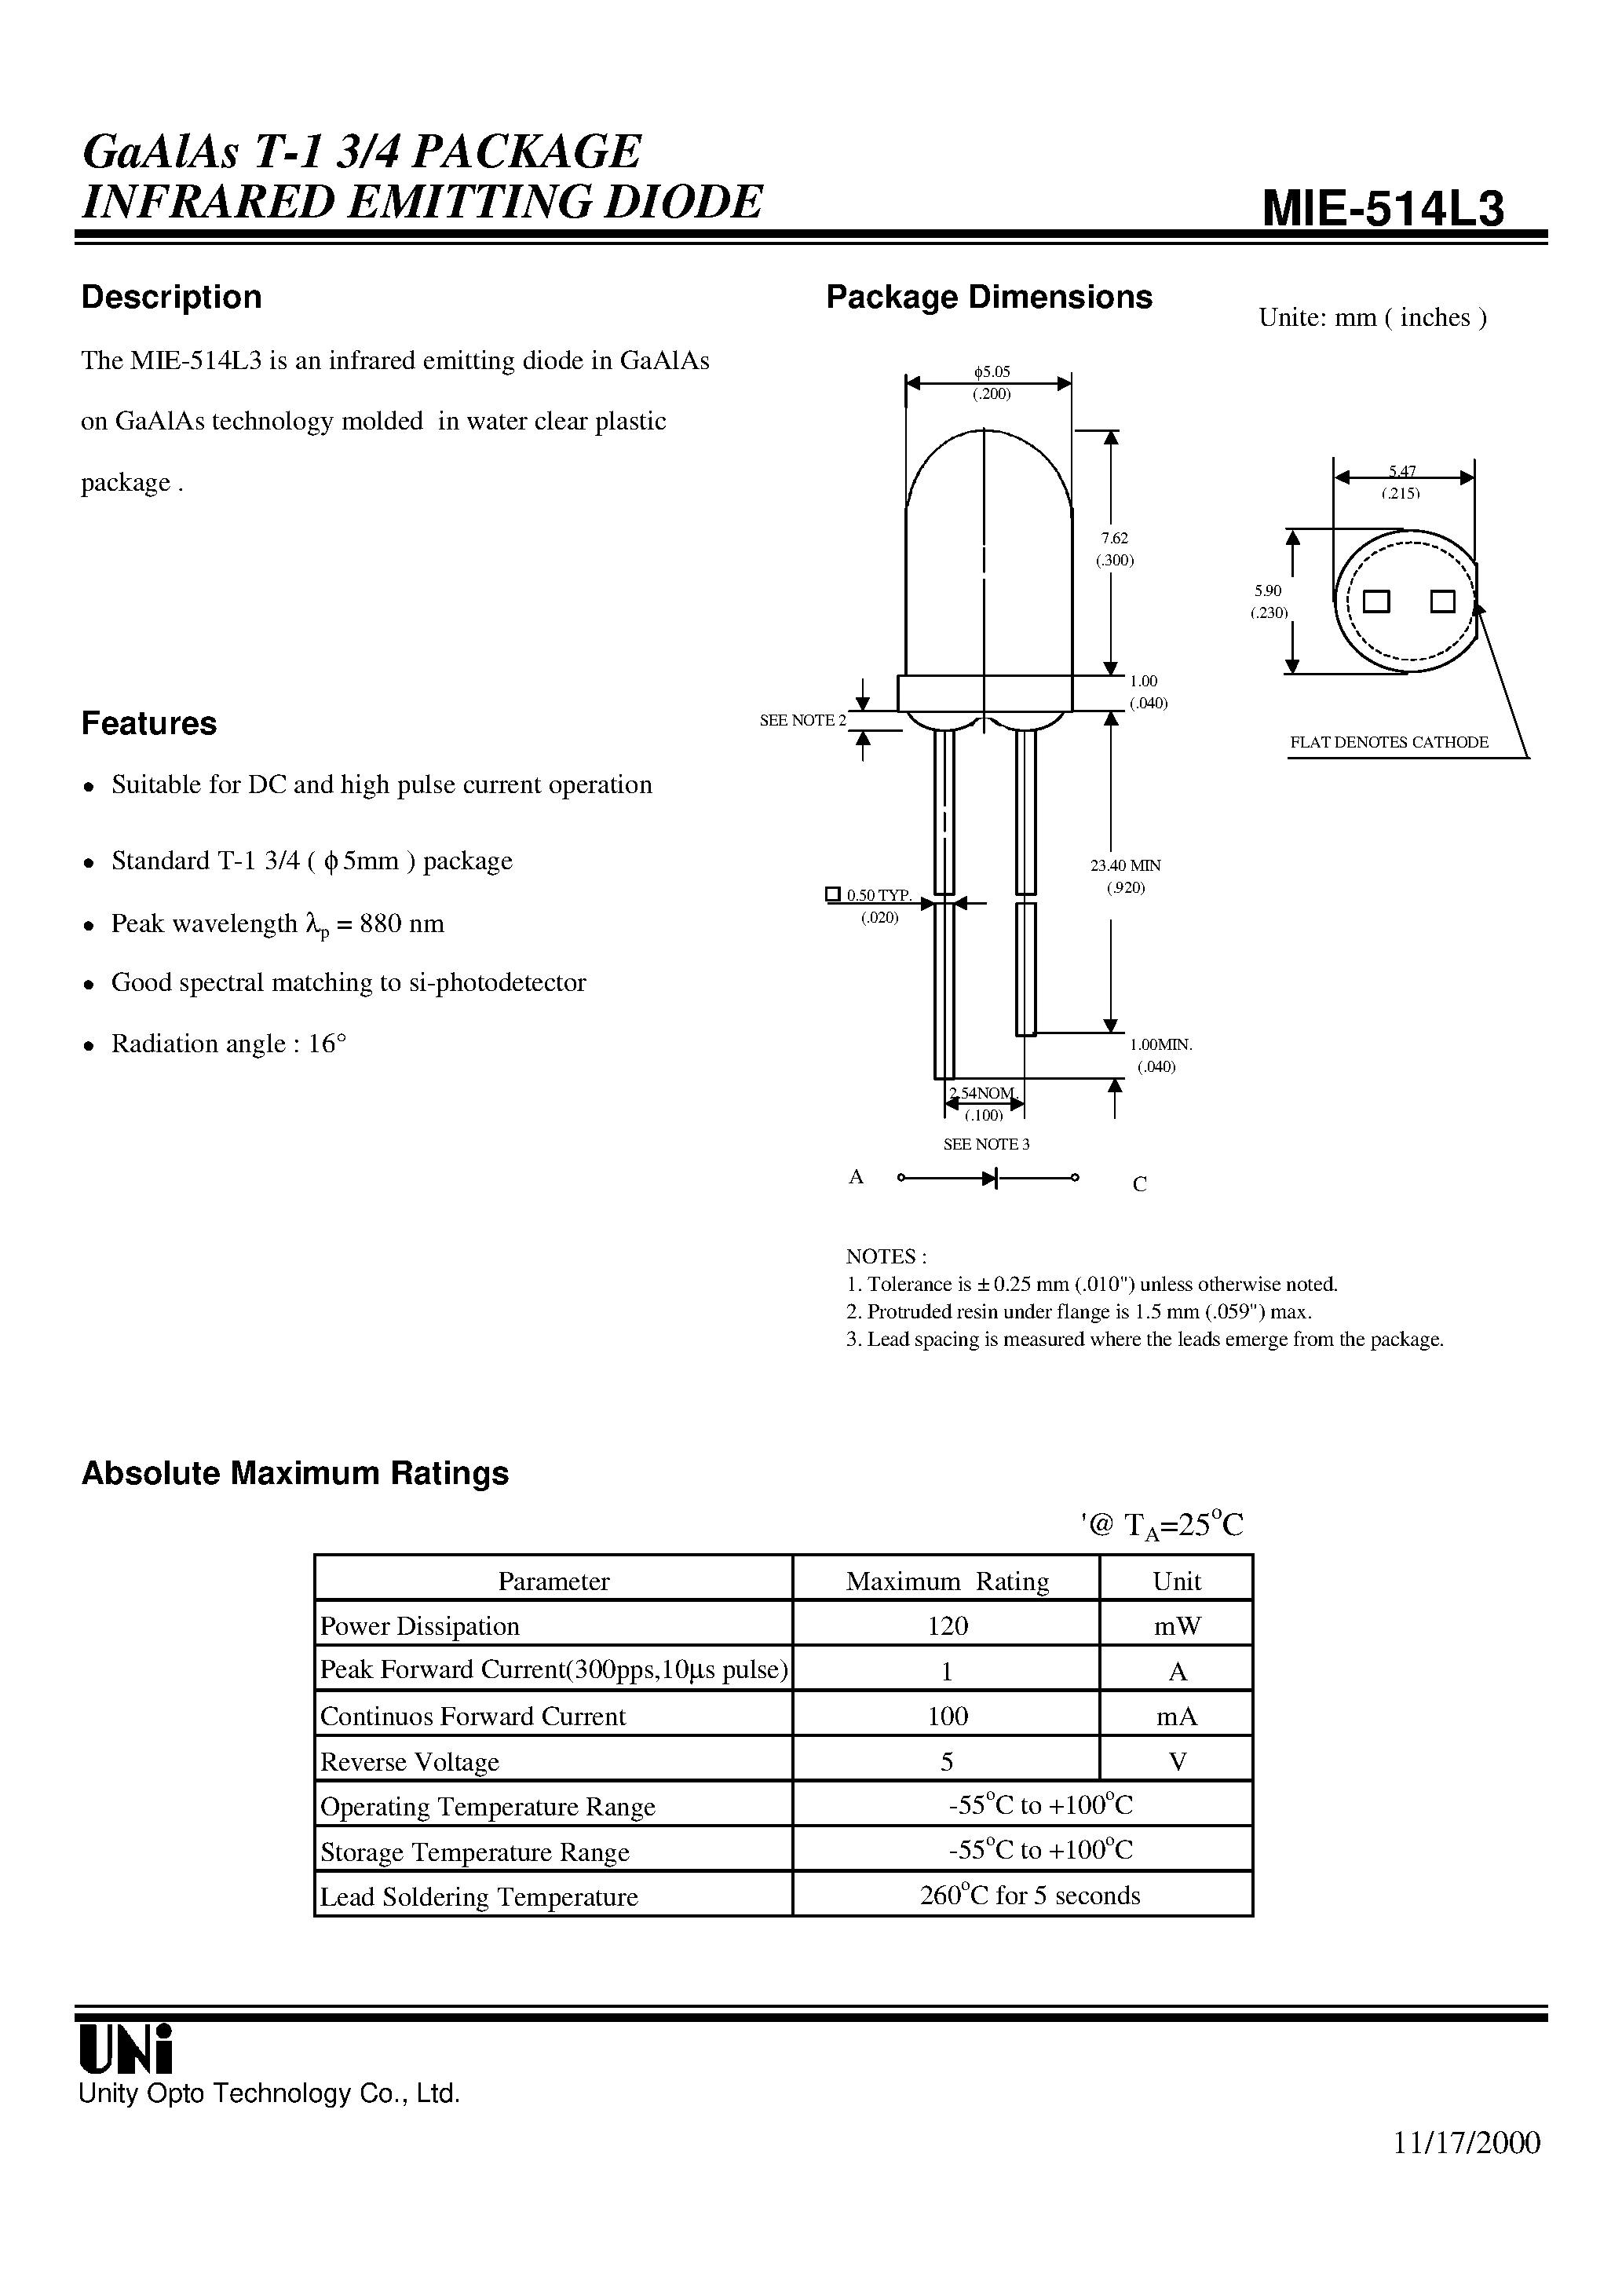 Datasheet MIE-514L3 - GaAlAs T-1 3/4 PACKAGE INFRARED EMITTING DIODE page 1